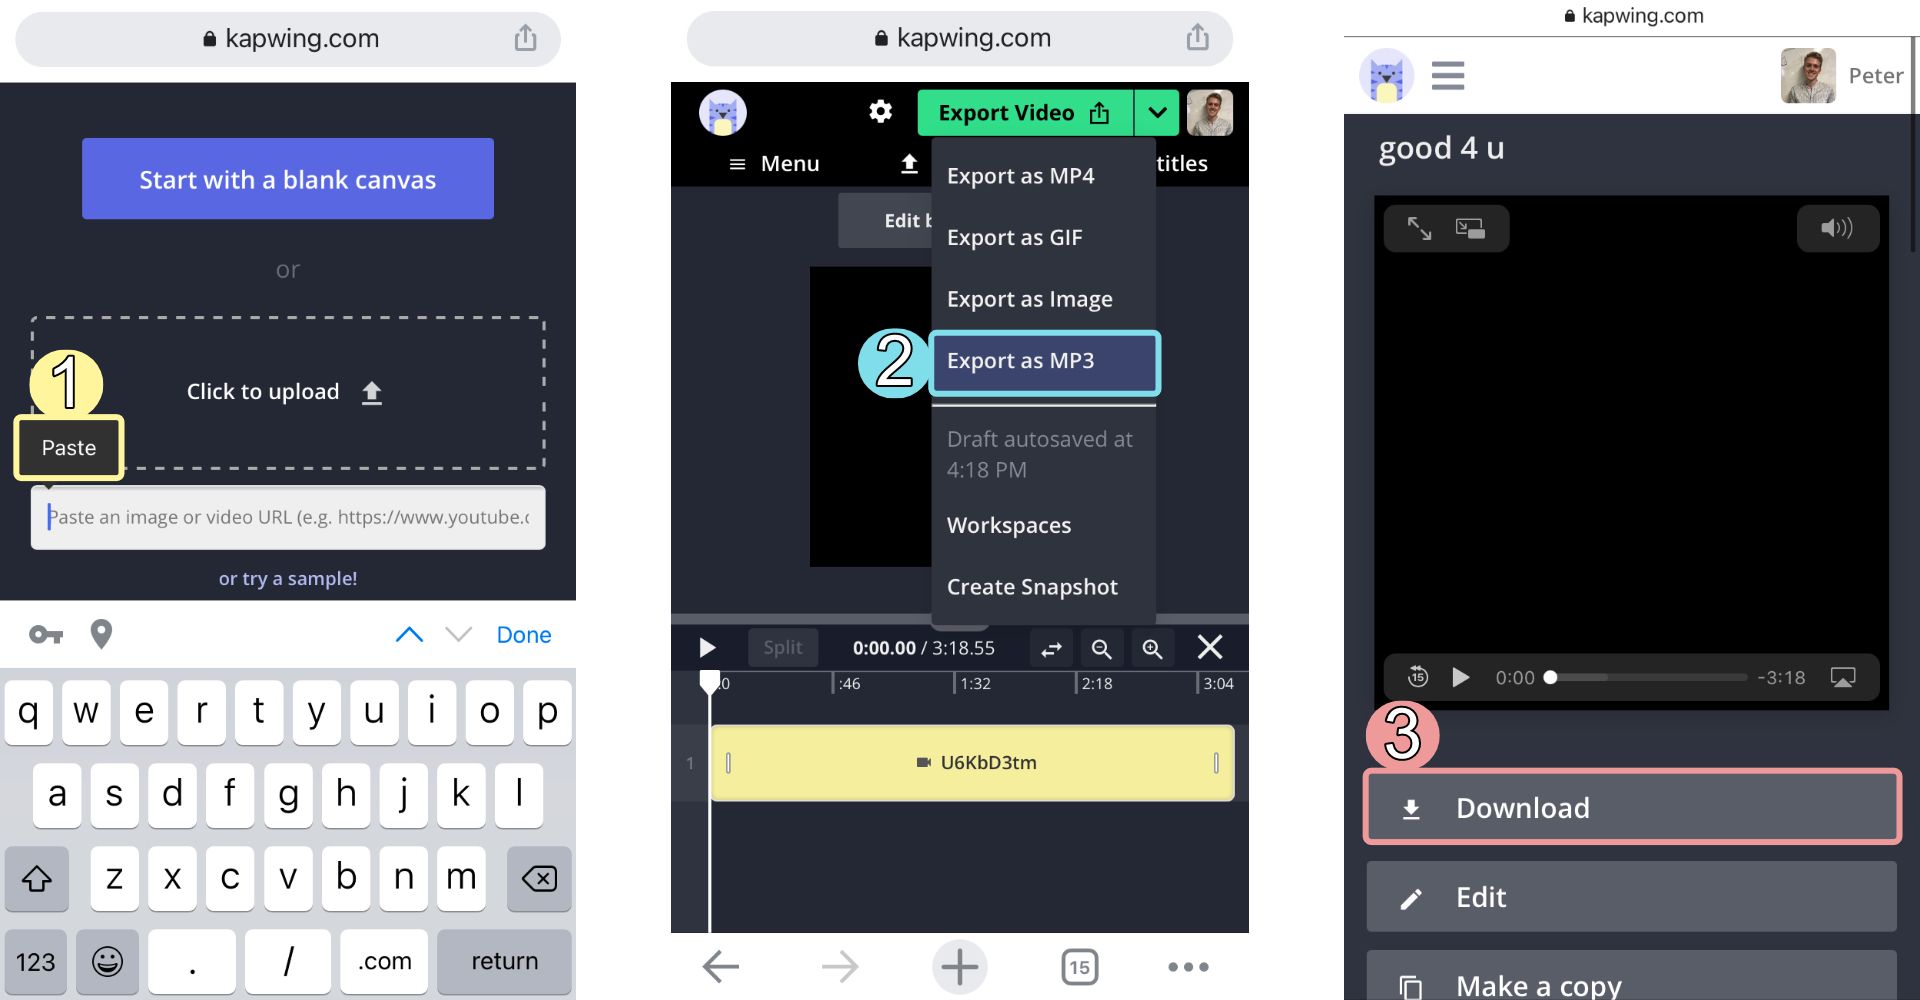 Screenshots showing how to download music fro YouTube or TikTok using the Kapwing Studio. 